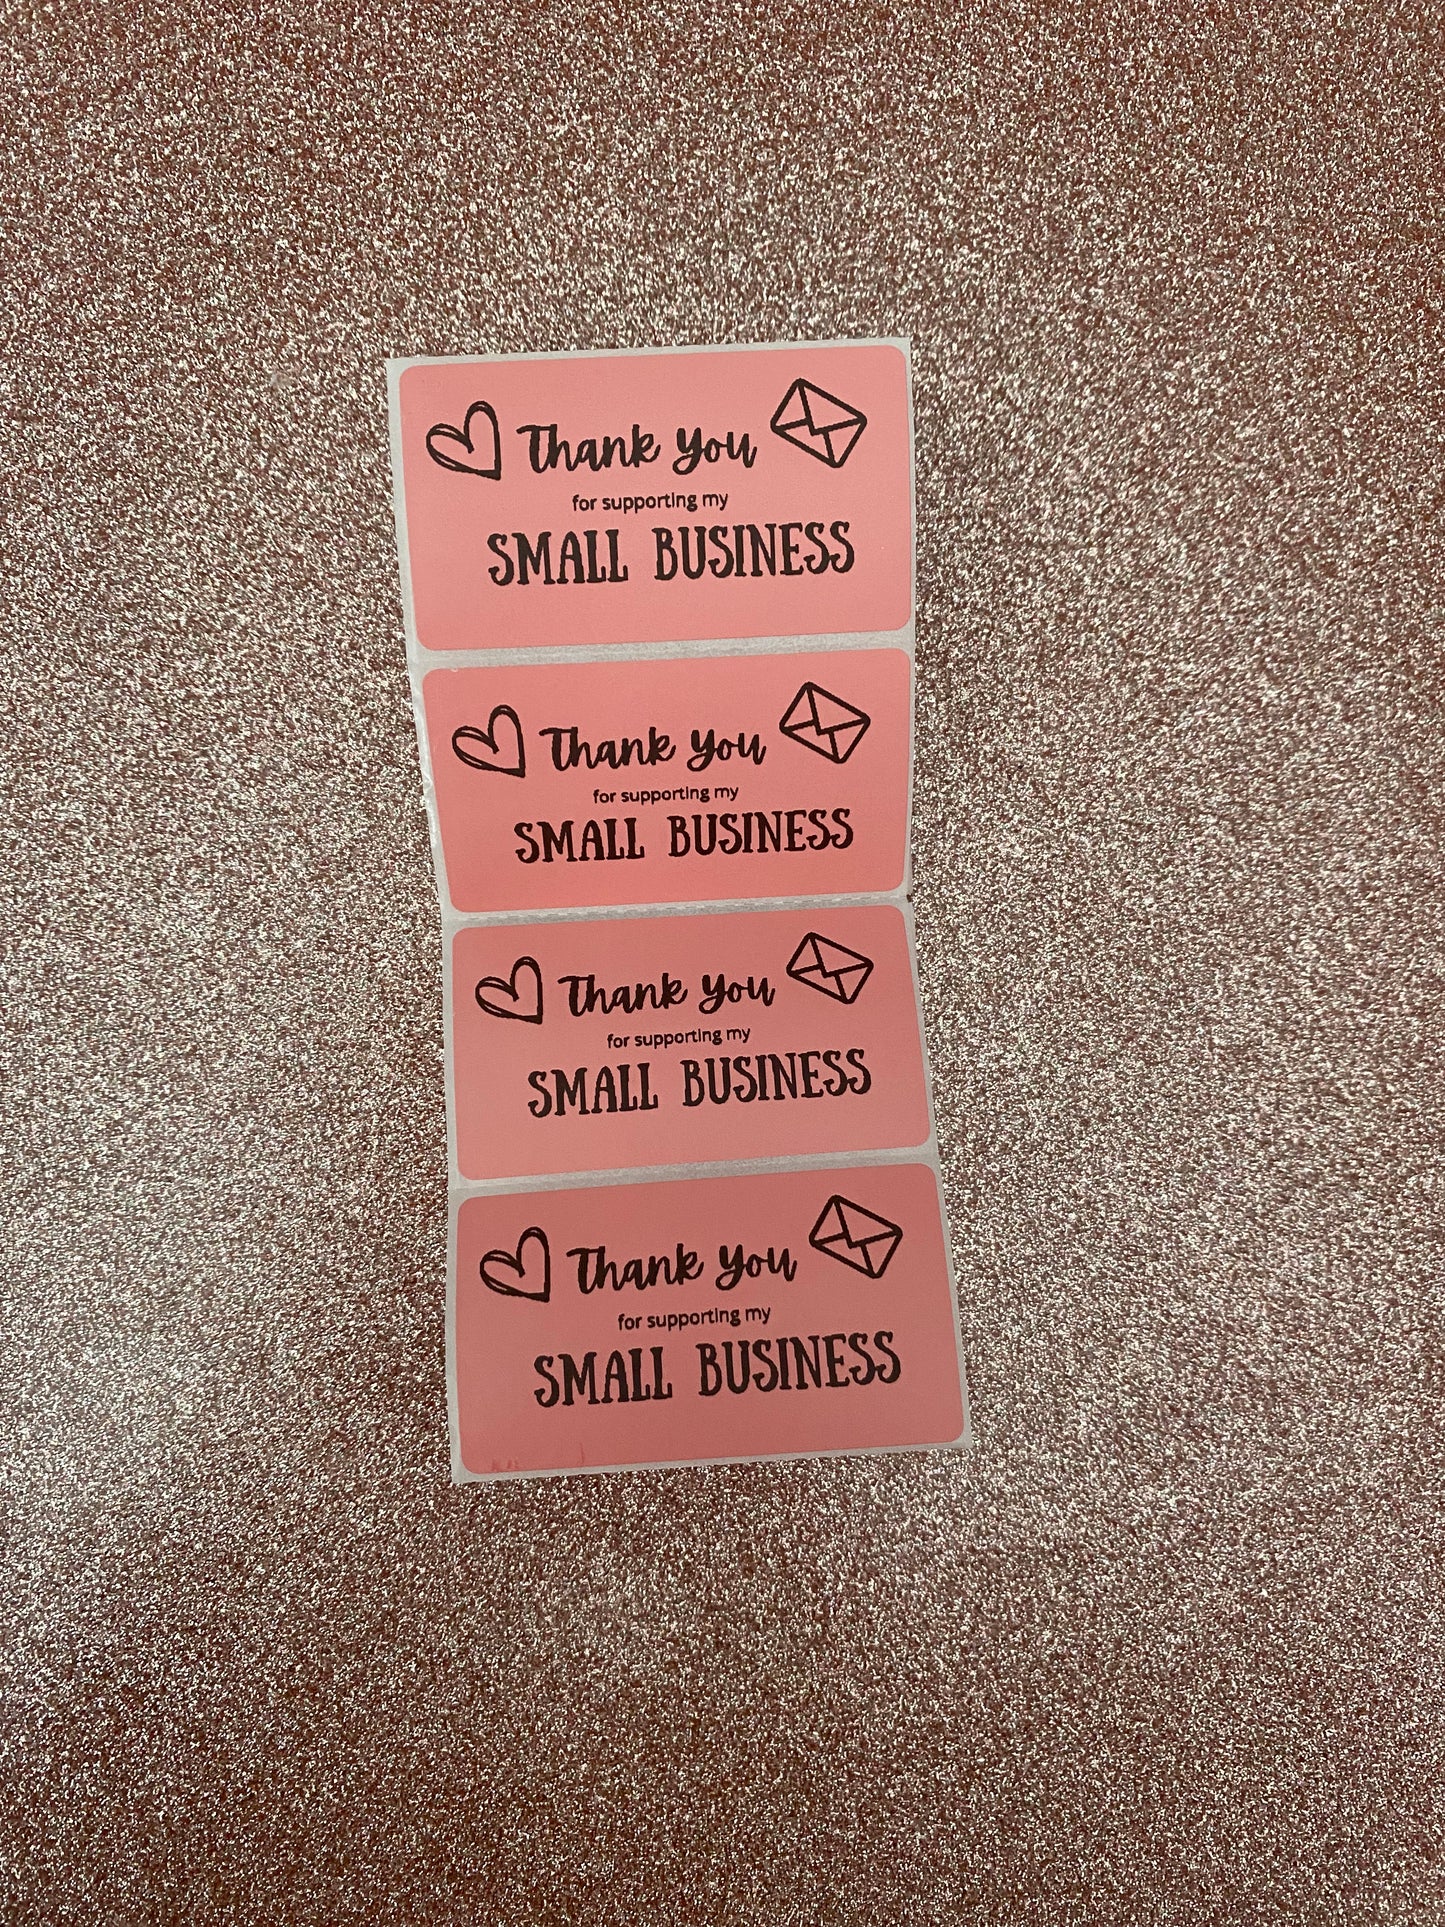 Small business pink stickers